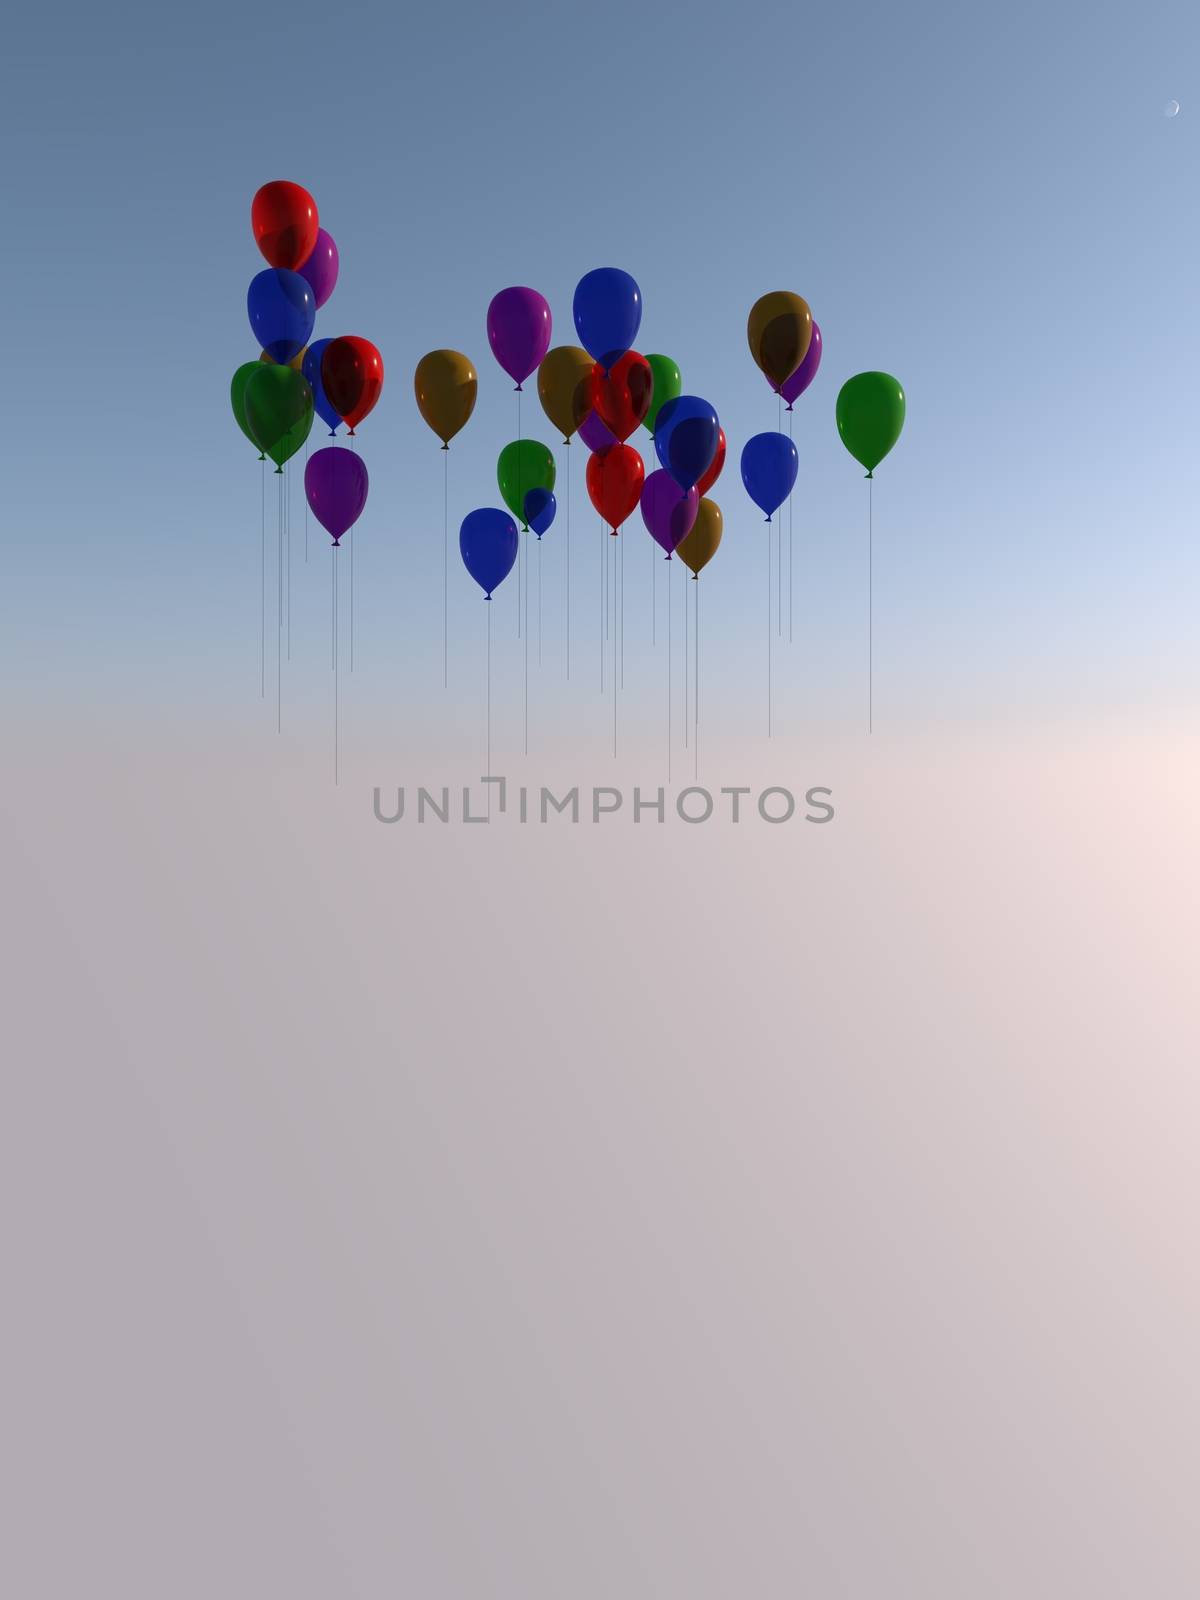 Several flying colored balloons by fares139